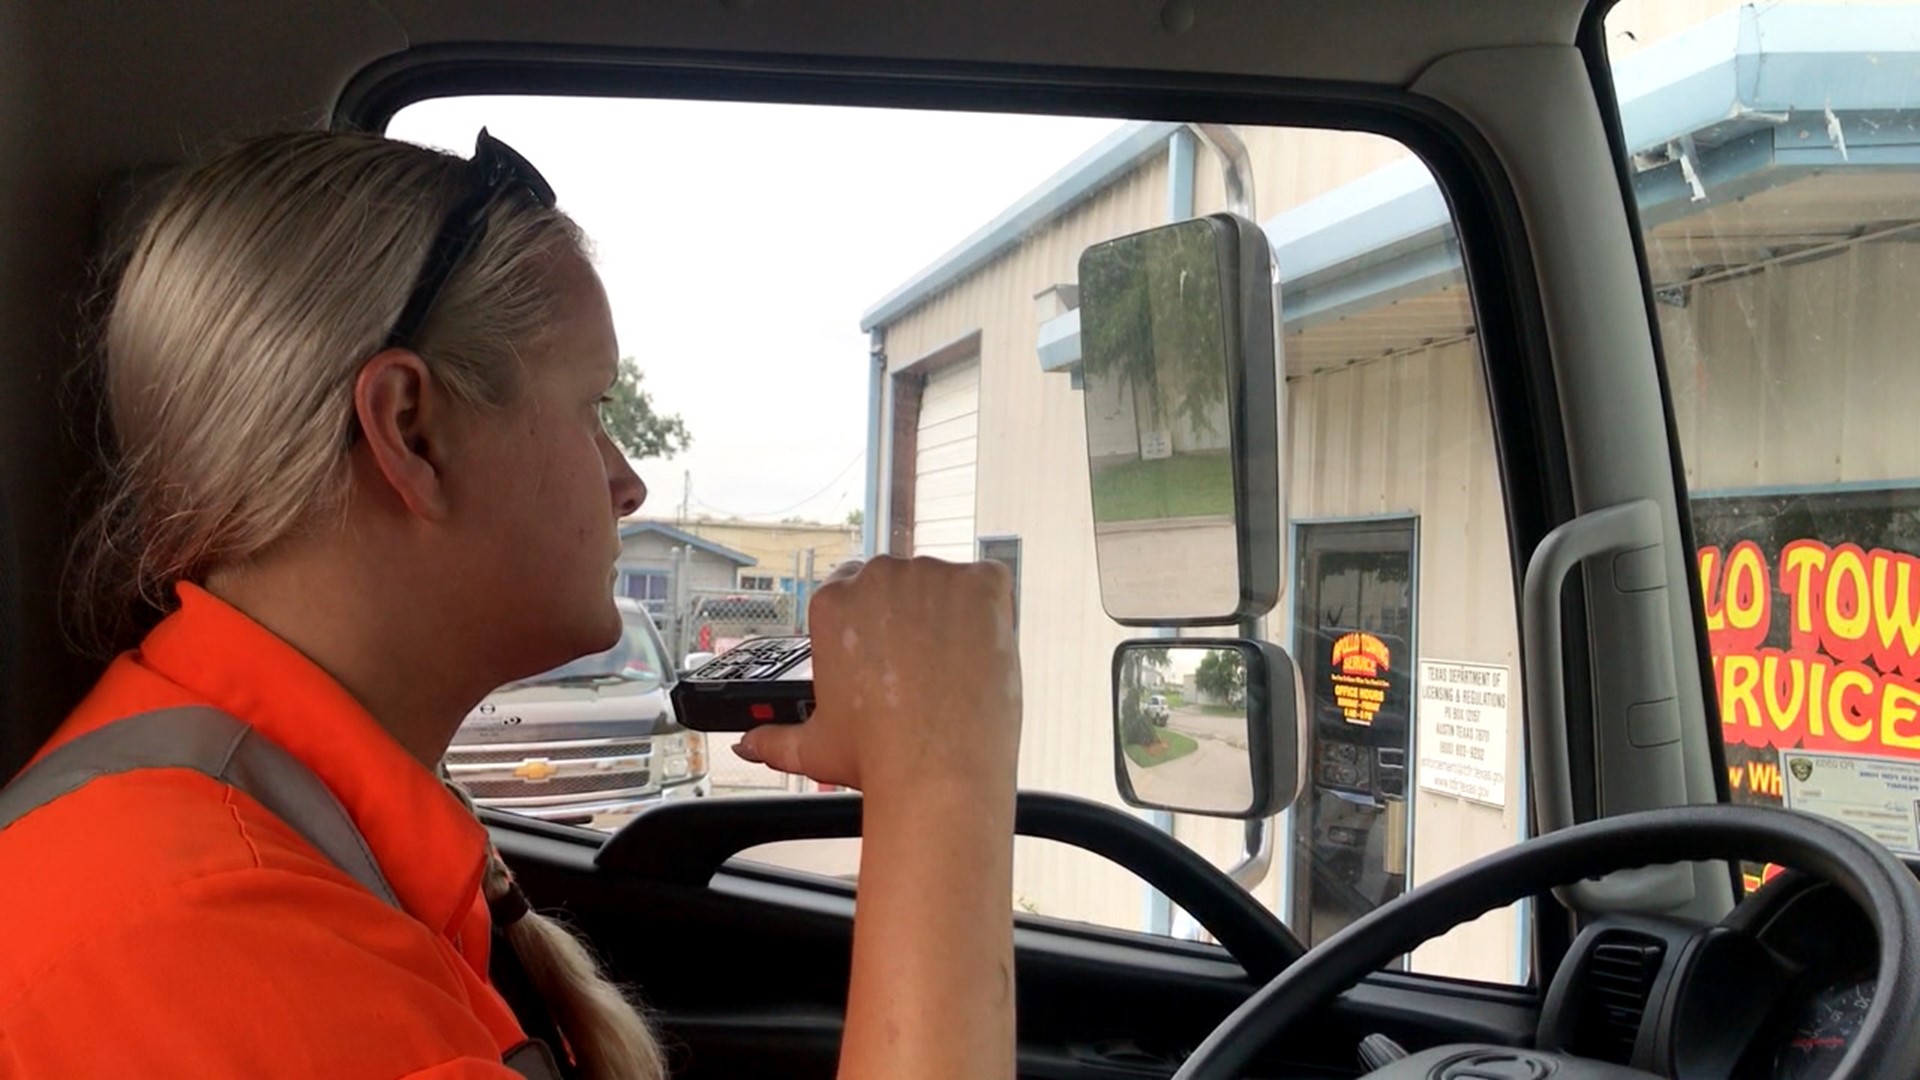 It's a demanding and dangerous line of work, but for some like 26-year-old Leanne Phillips, driving a flatbed wrecker is in her blood.